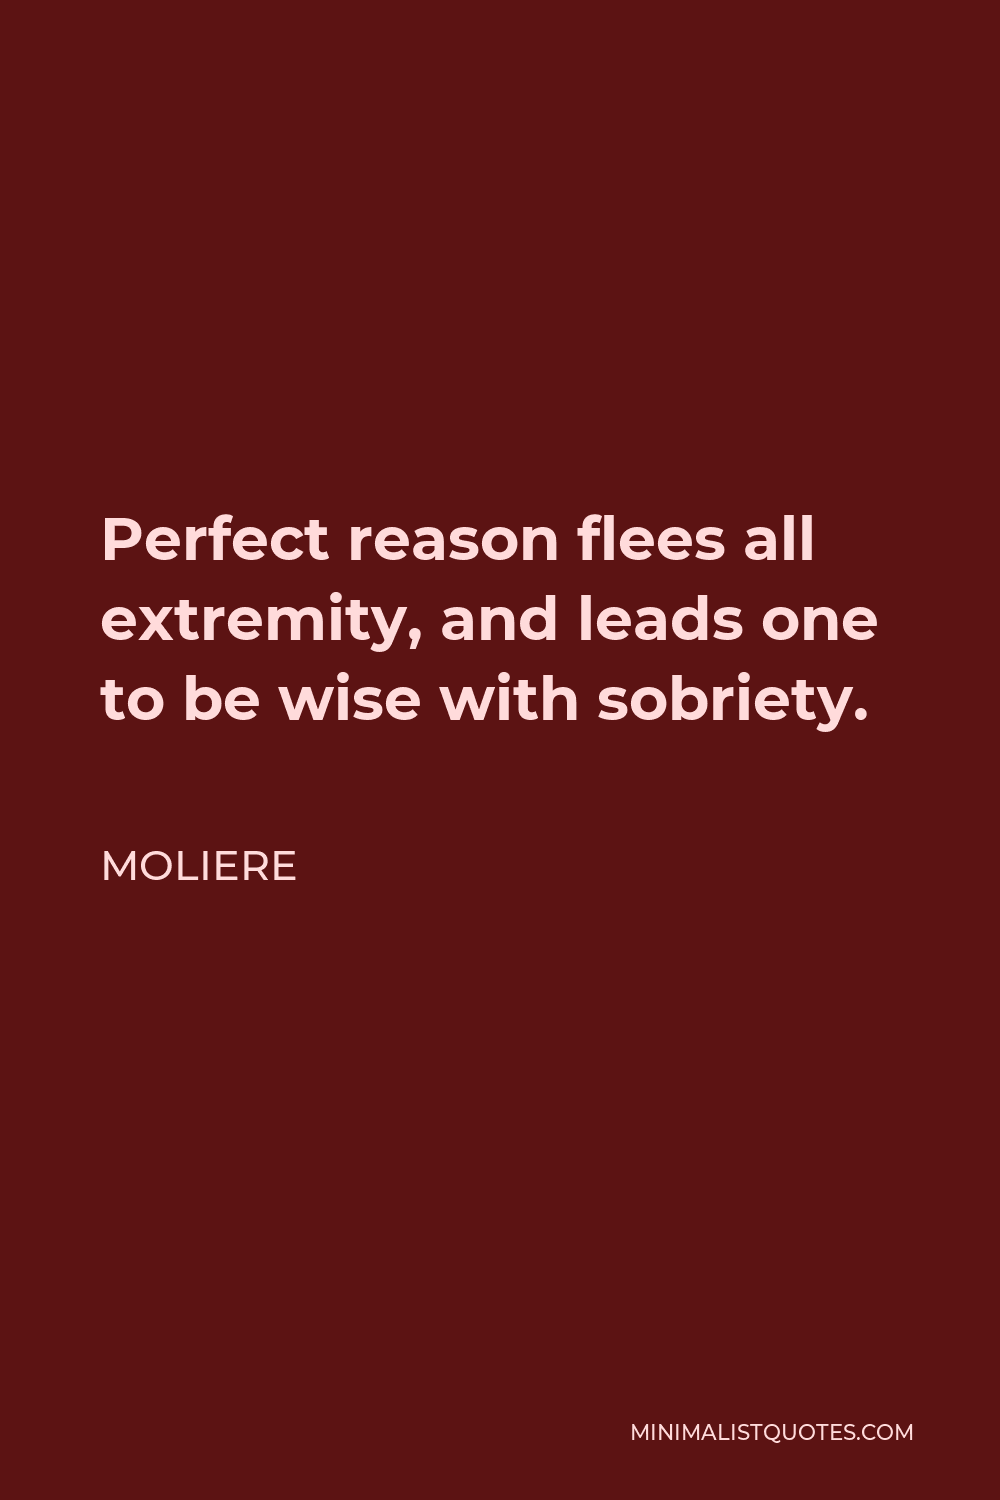 Moliere Quote - Perfect reason flees all extremity, and leads one to be wise with sobriety.